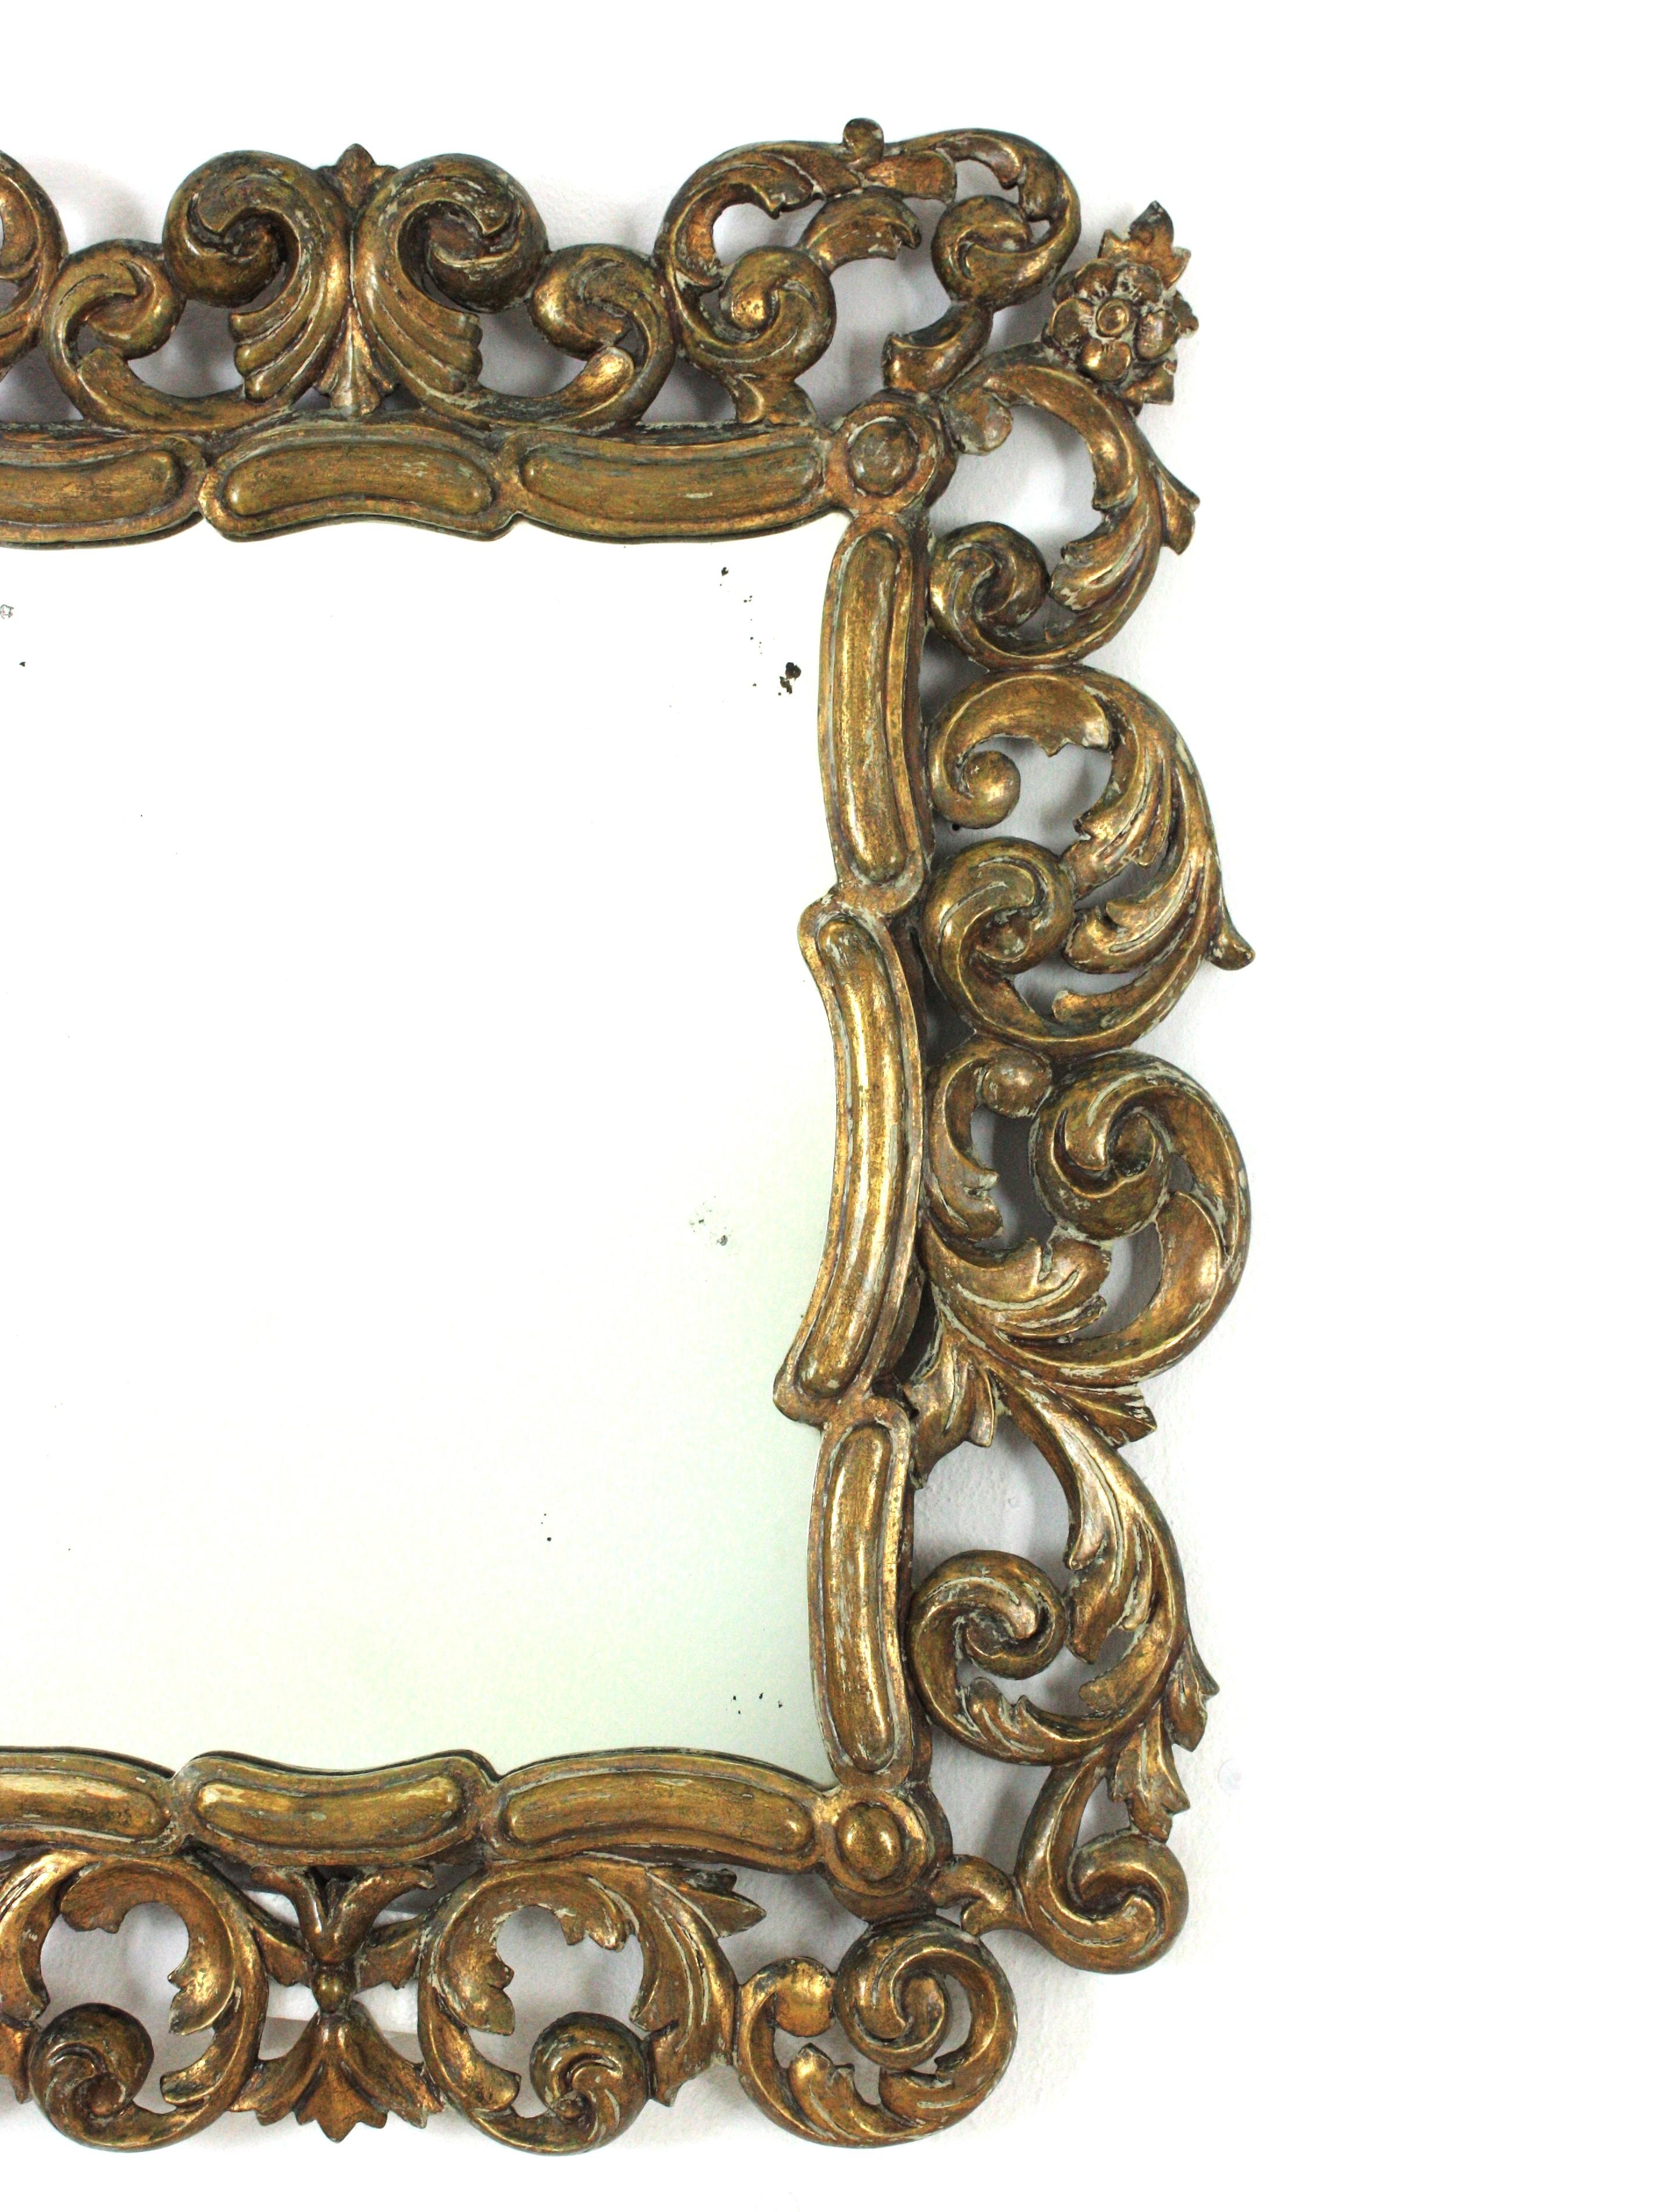 Gesso Spanish Foliage Gilt Carved Wood Mirror with Scroll Work Design For Sale